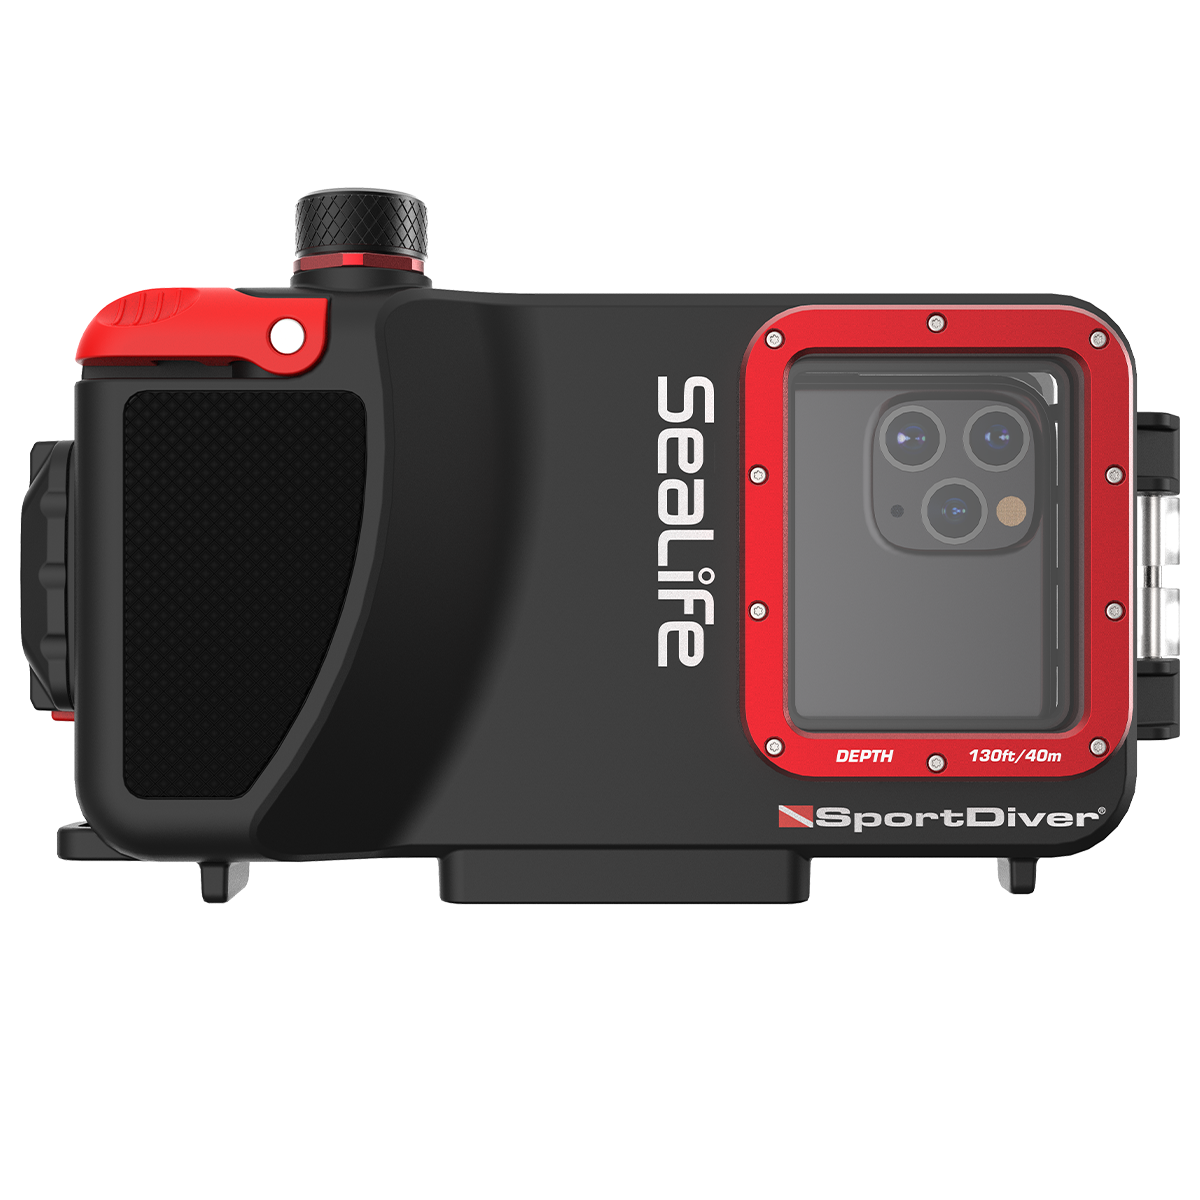 Open Box SeaLife SportDiver Underwater Smartphone Housing Fits & works with iPhone 7 through 12 Pro Max and most Android Phones. Check compatibility